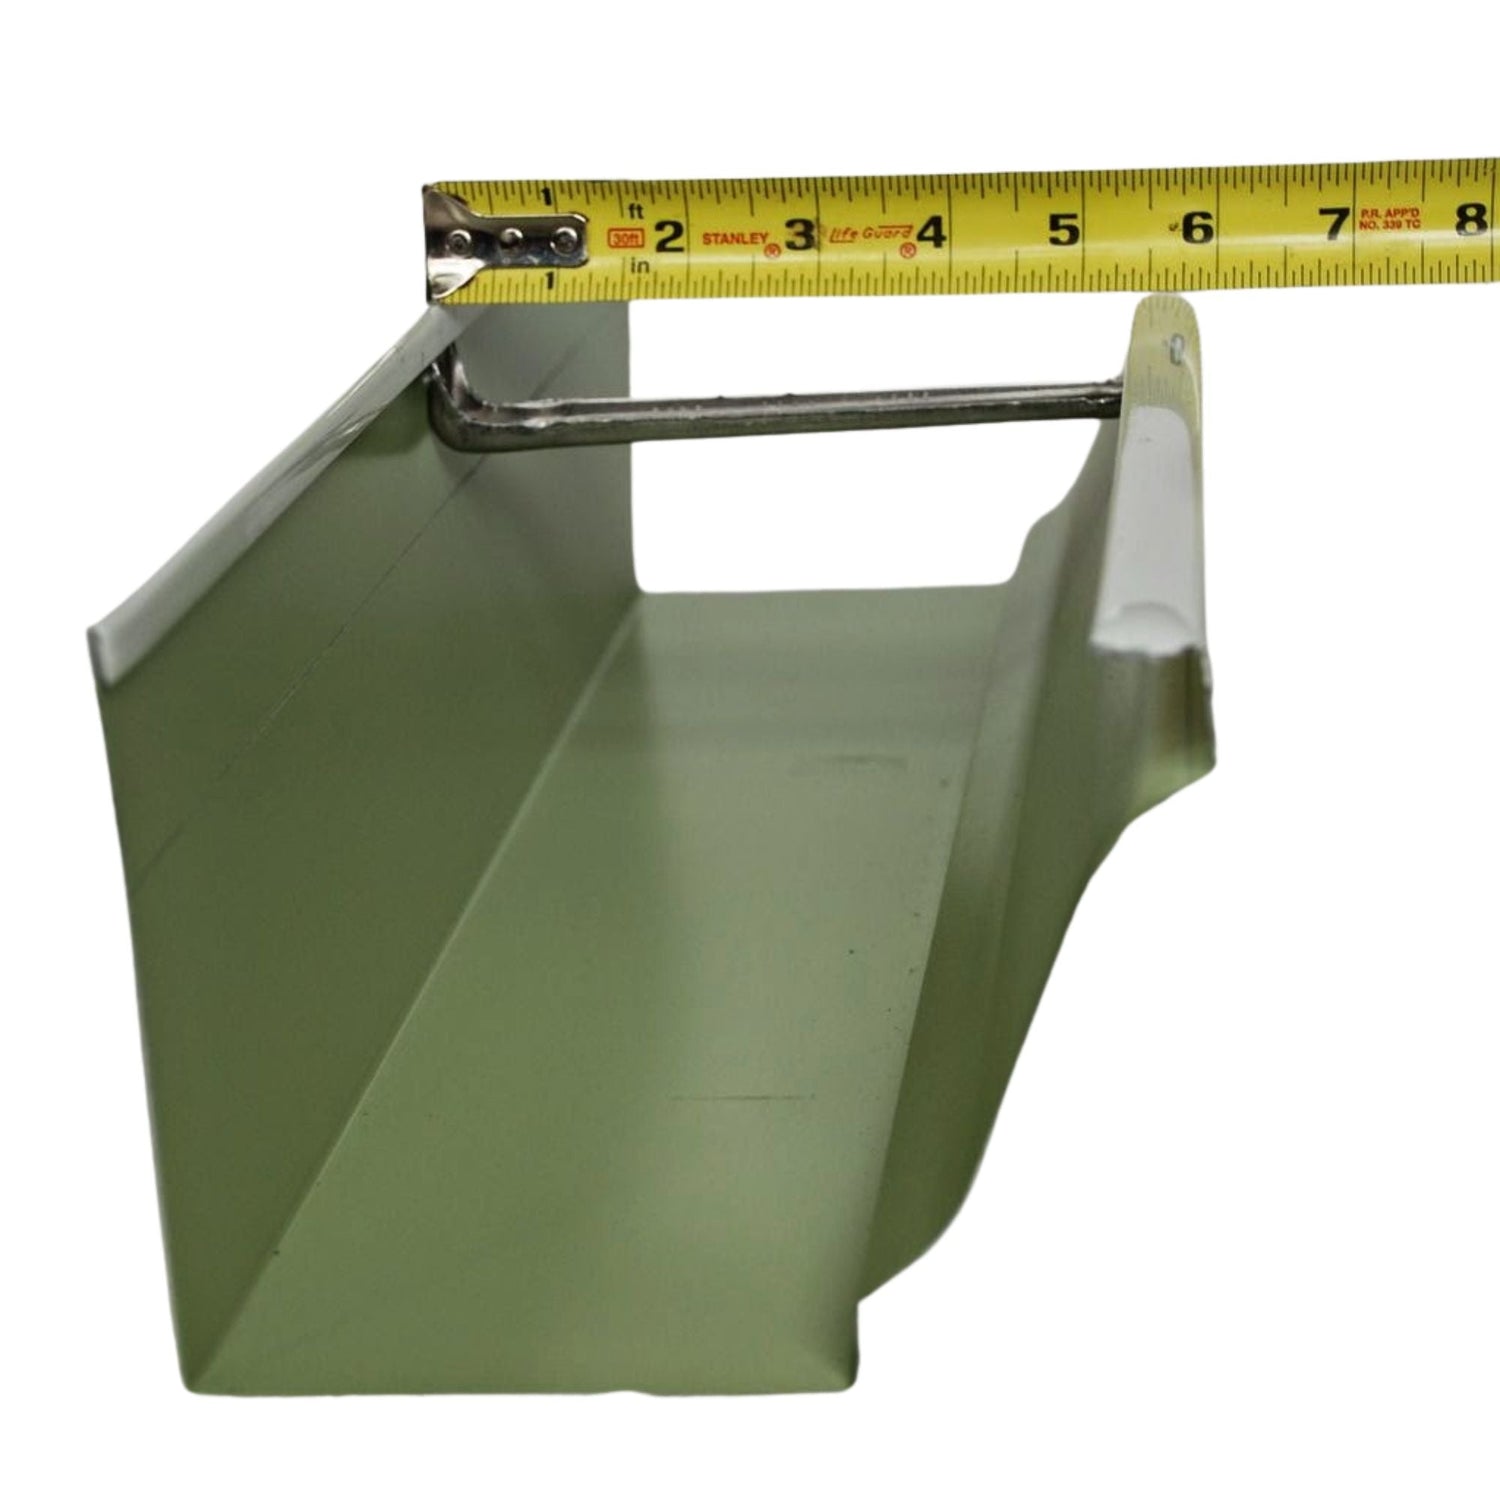 6 inch k-style gutter guards